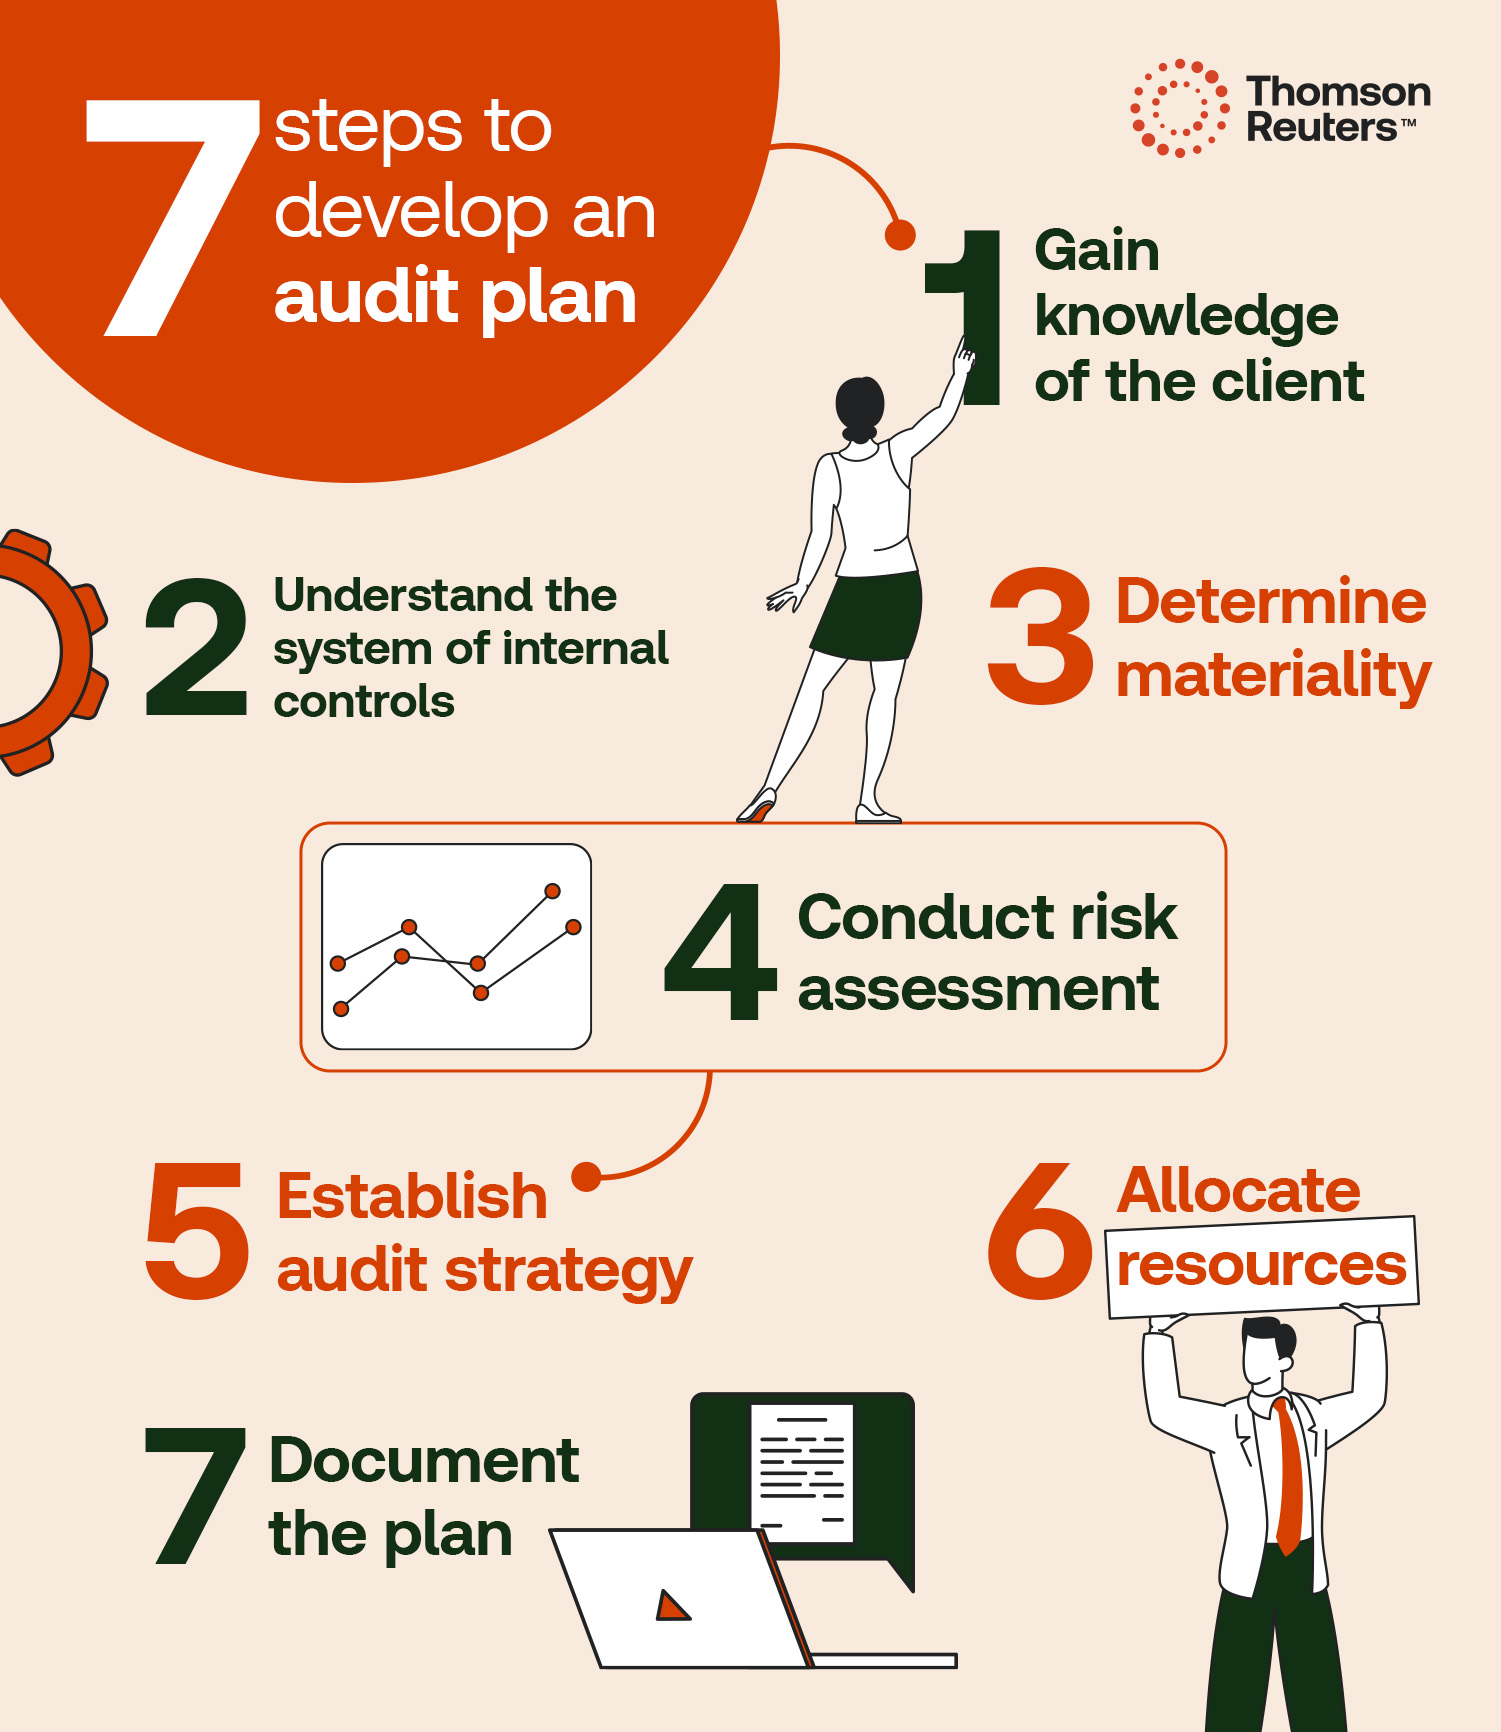 Infographic showing a summary of the seven steps to developing an audit plan.